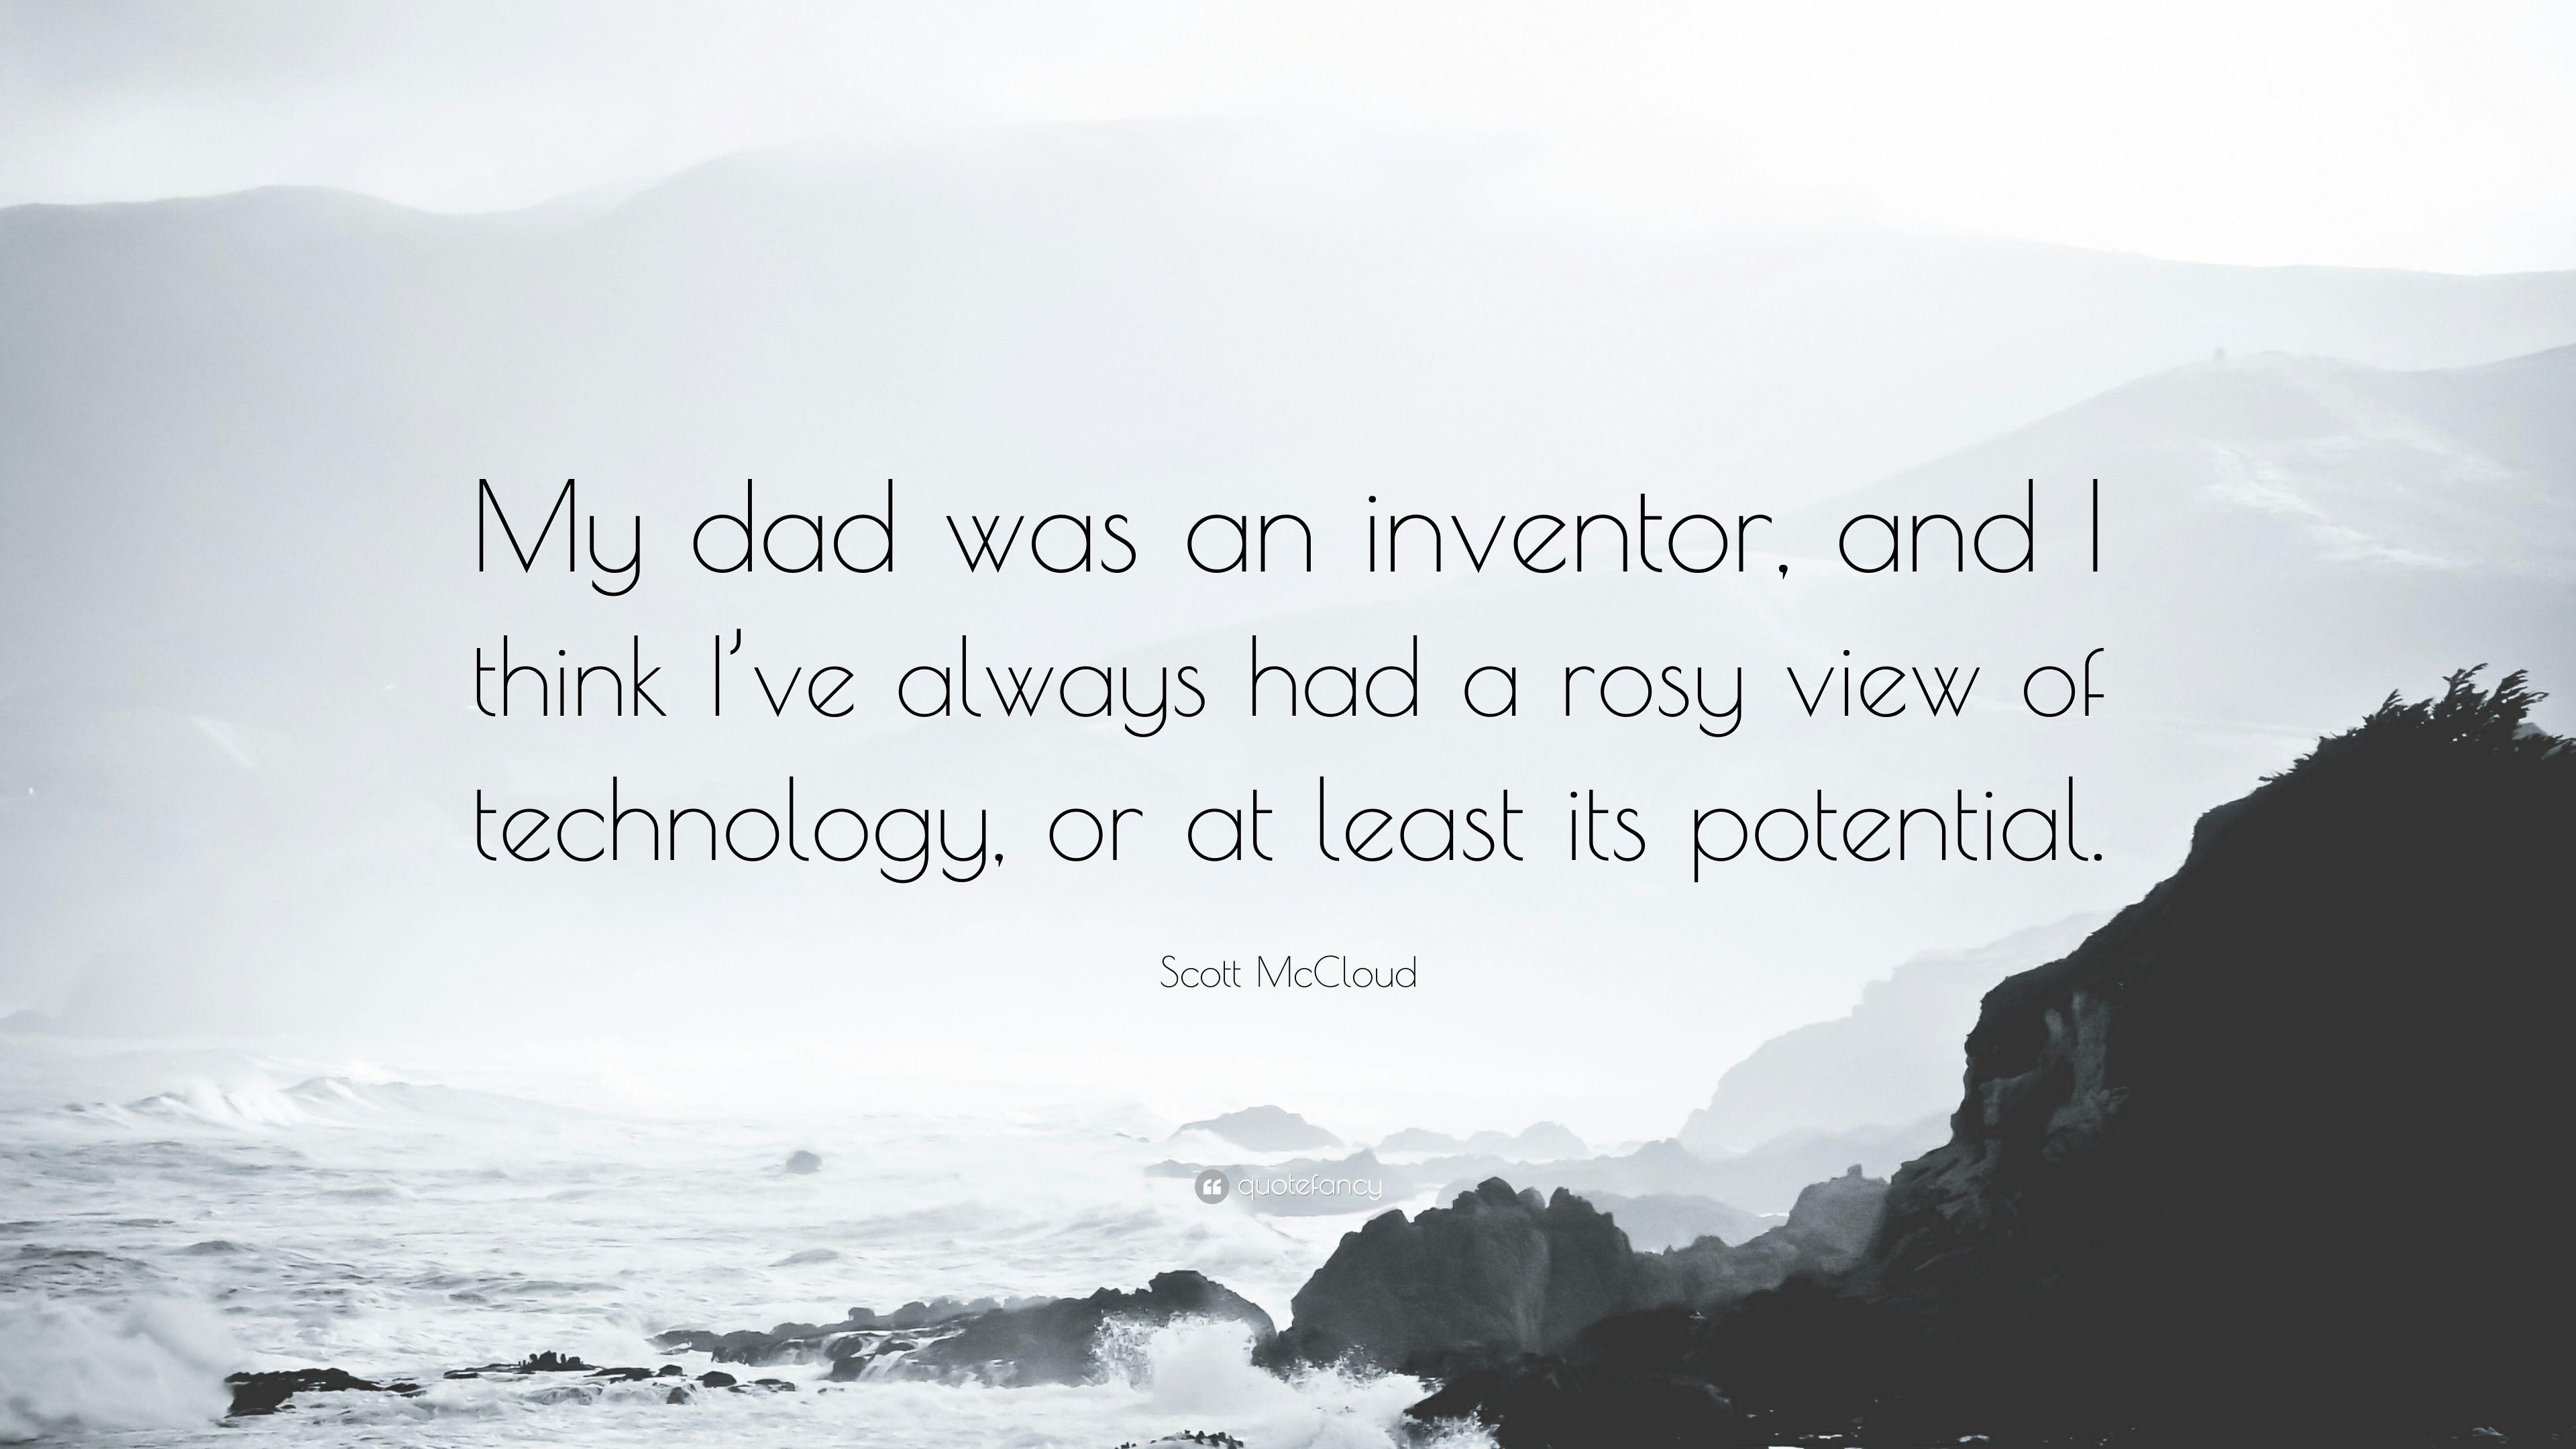 Scott McCloud Quote: “My dad was an inventor, and I think I've